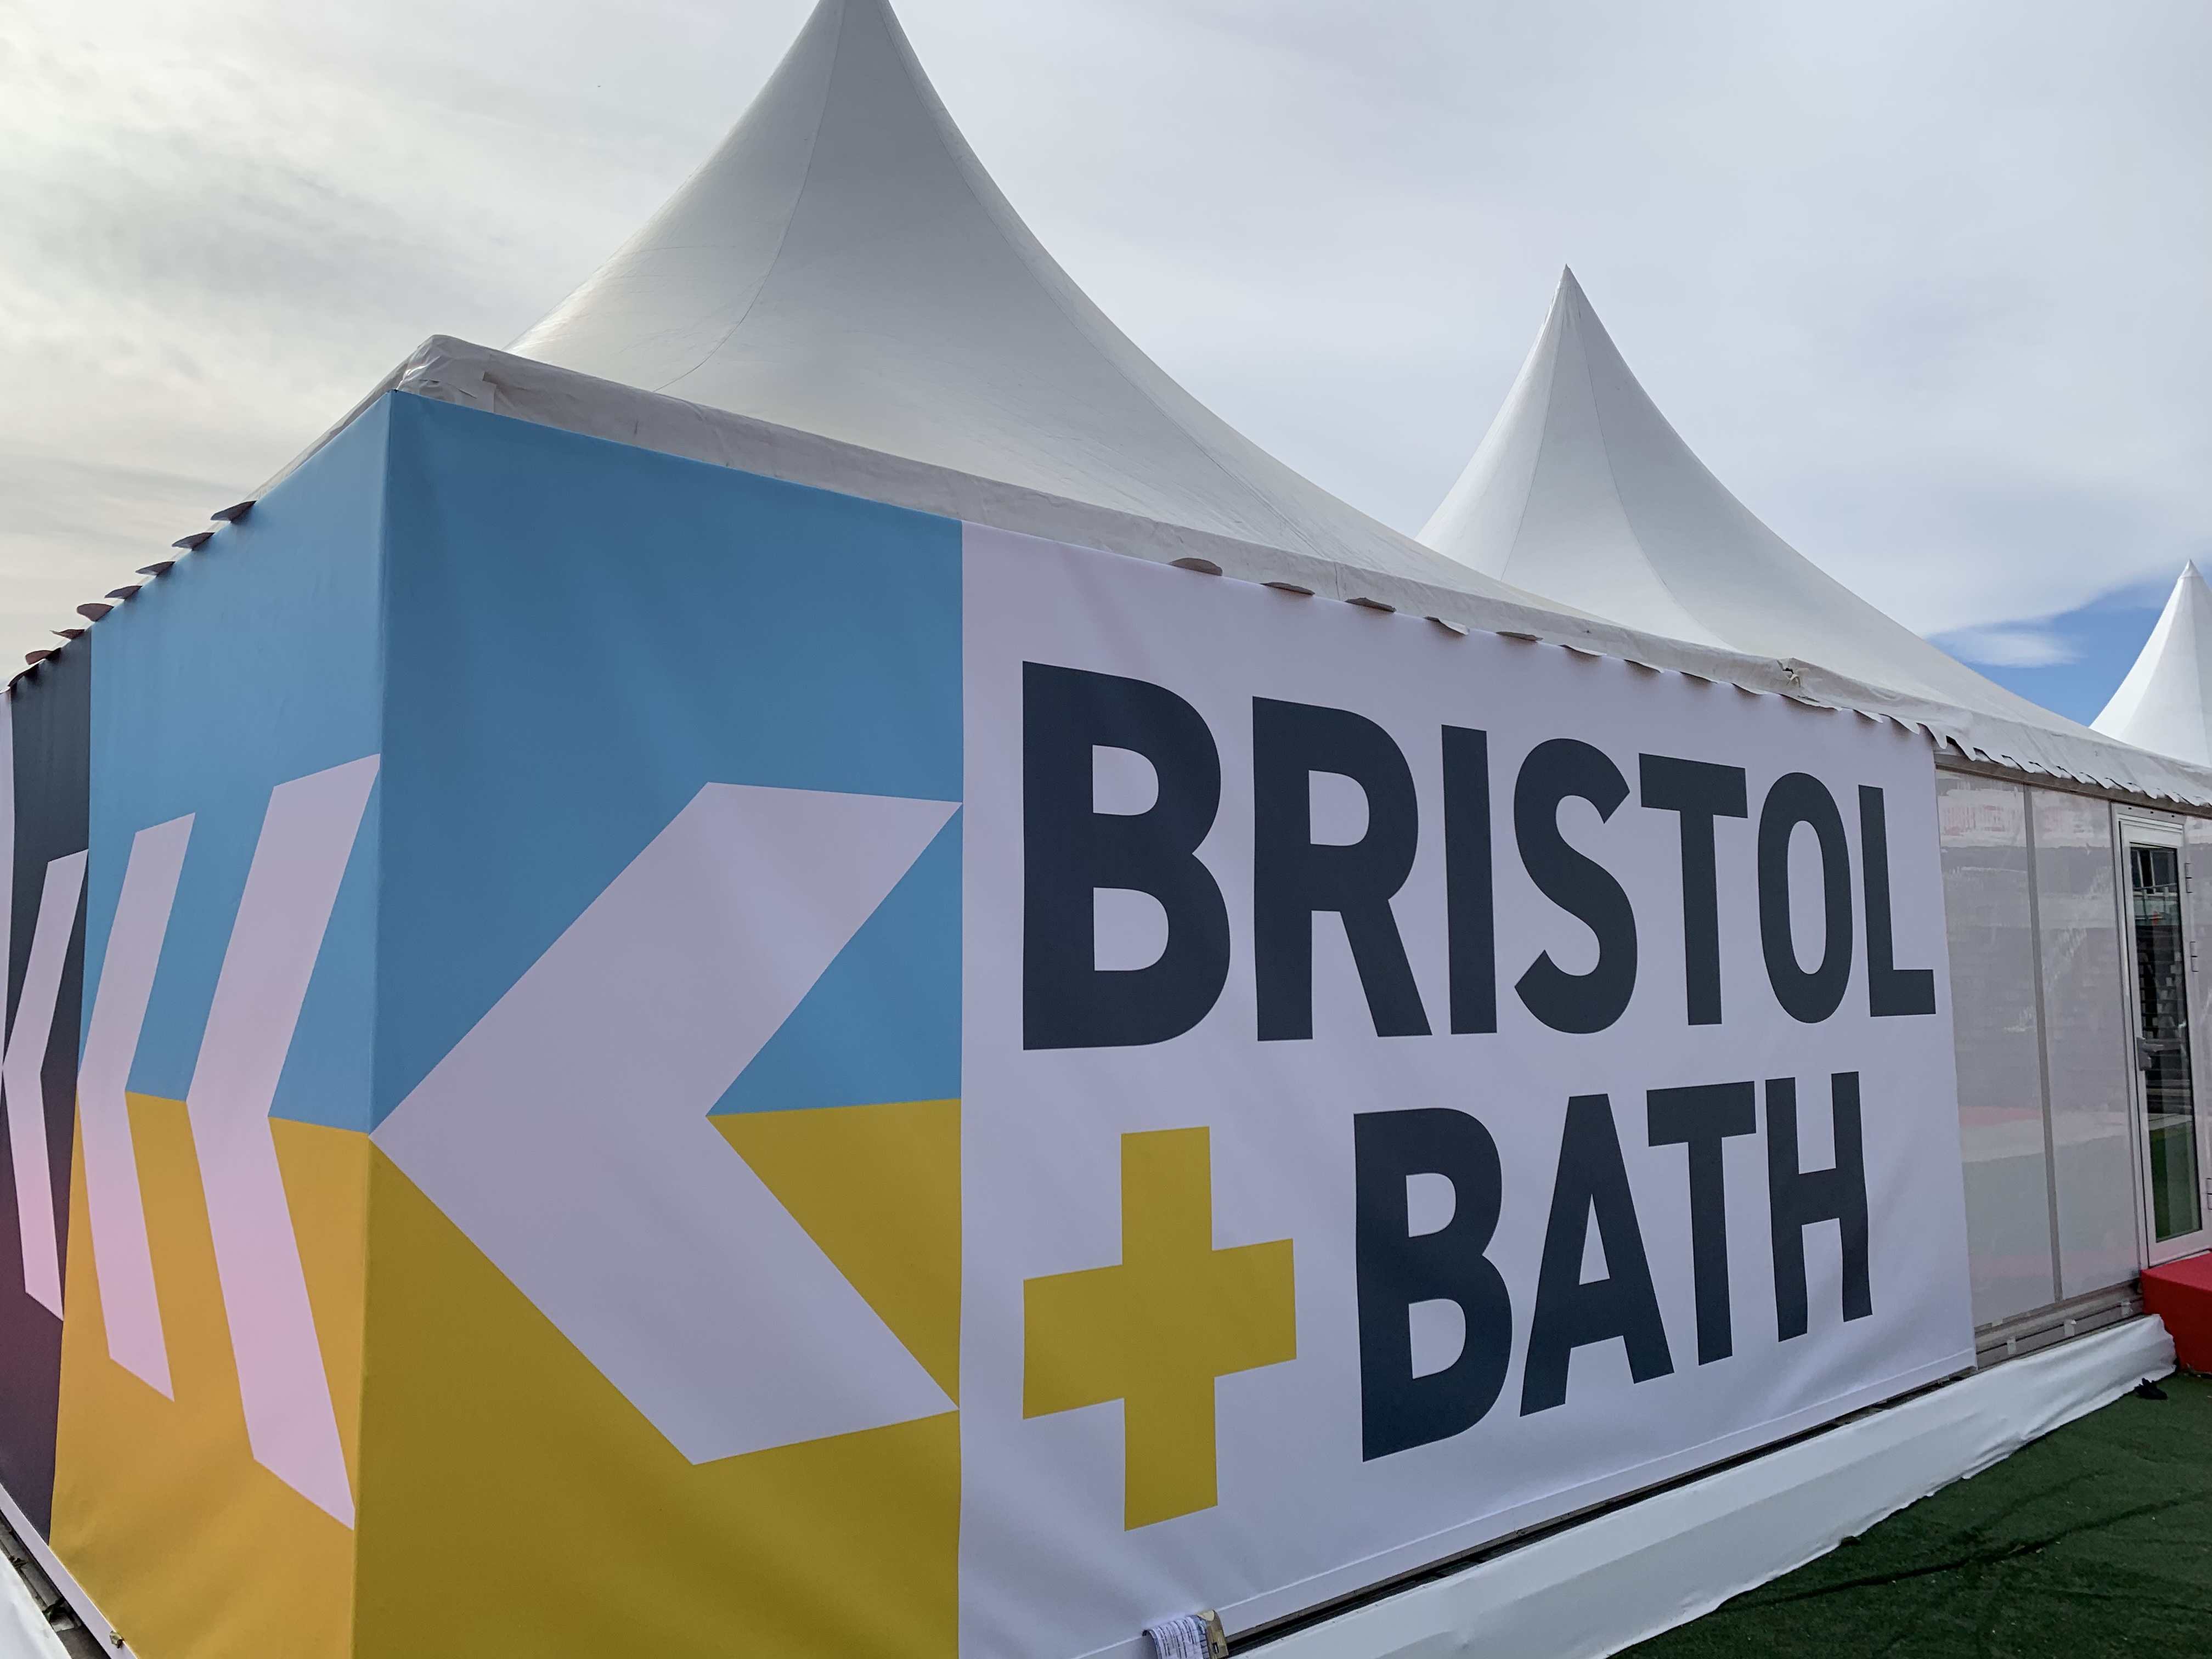 Bristol and Bath sign at an event